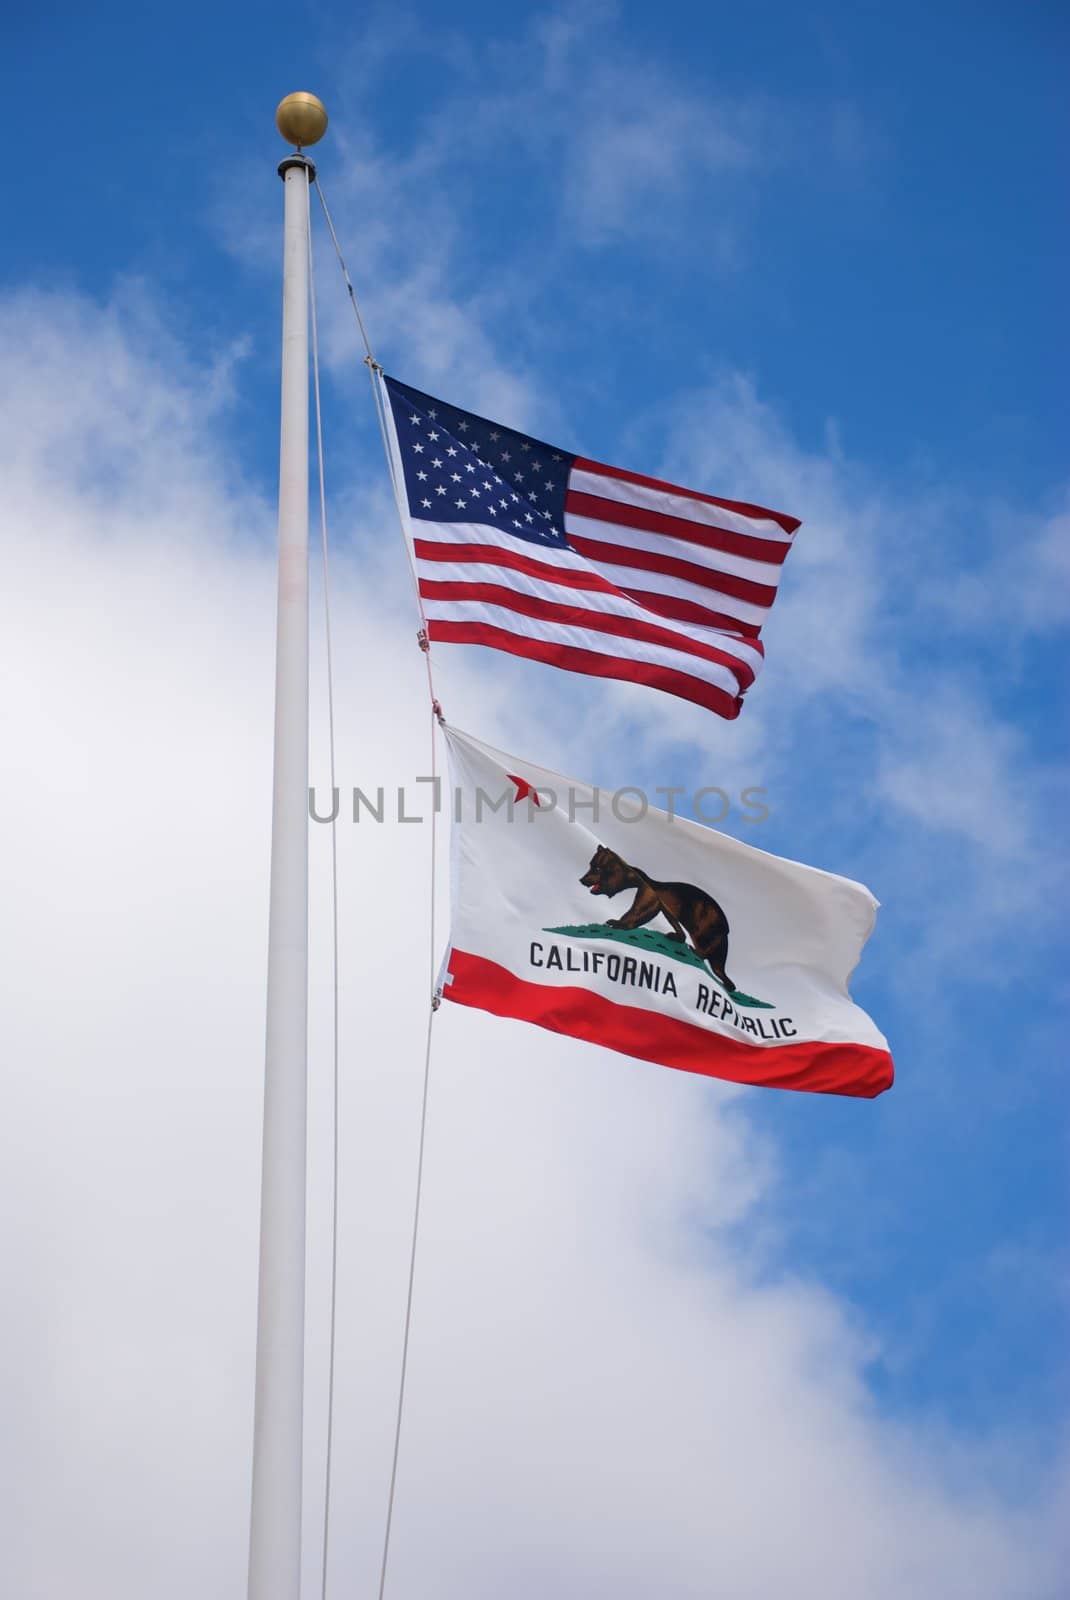 USA and California Flags by pixelsnap